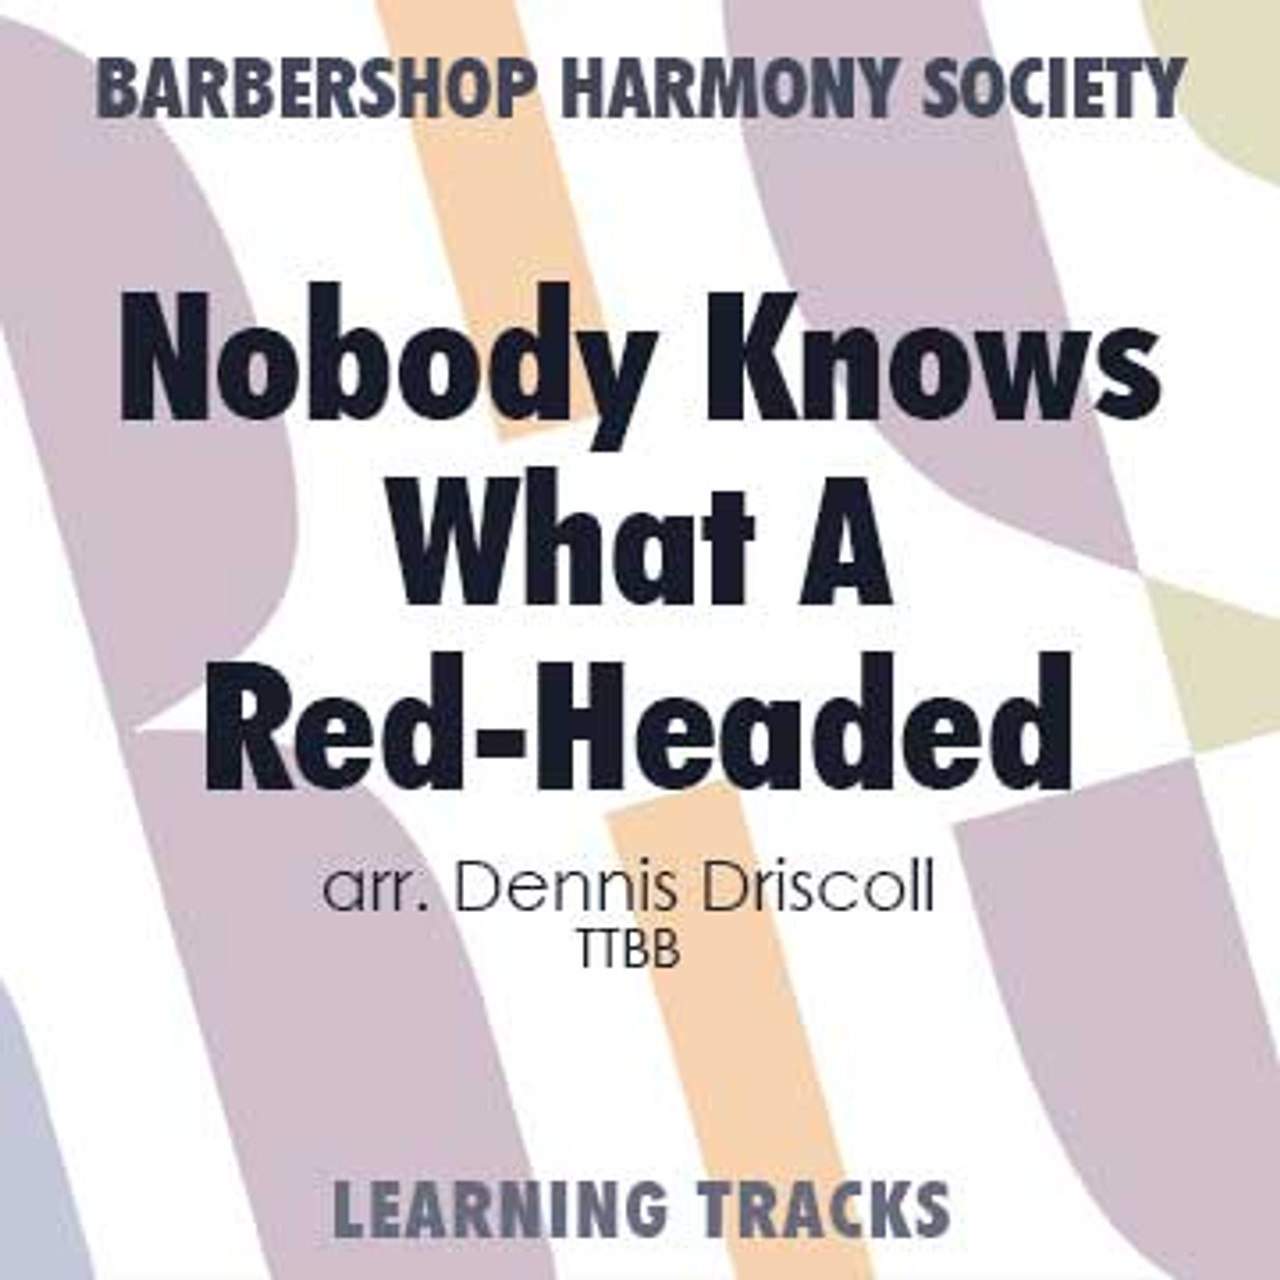 Nobody Knows What A Red-Headed Mama Can Do (TTBB) (arr. Driscoll) - Digital Learning Tracks for 202218